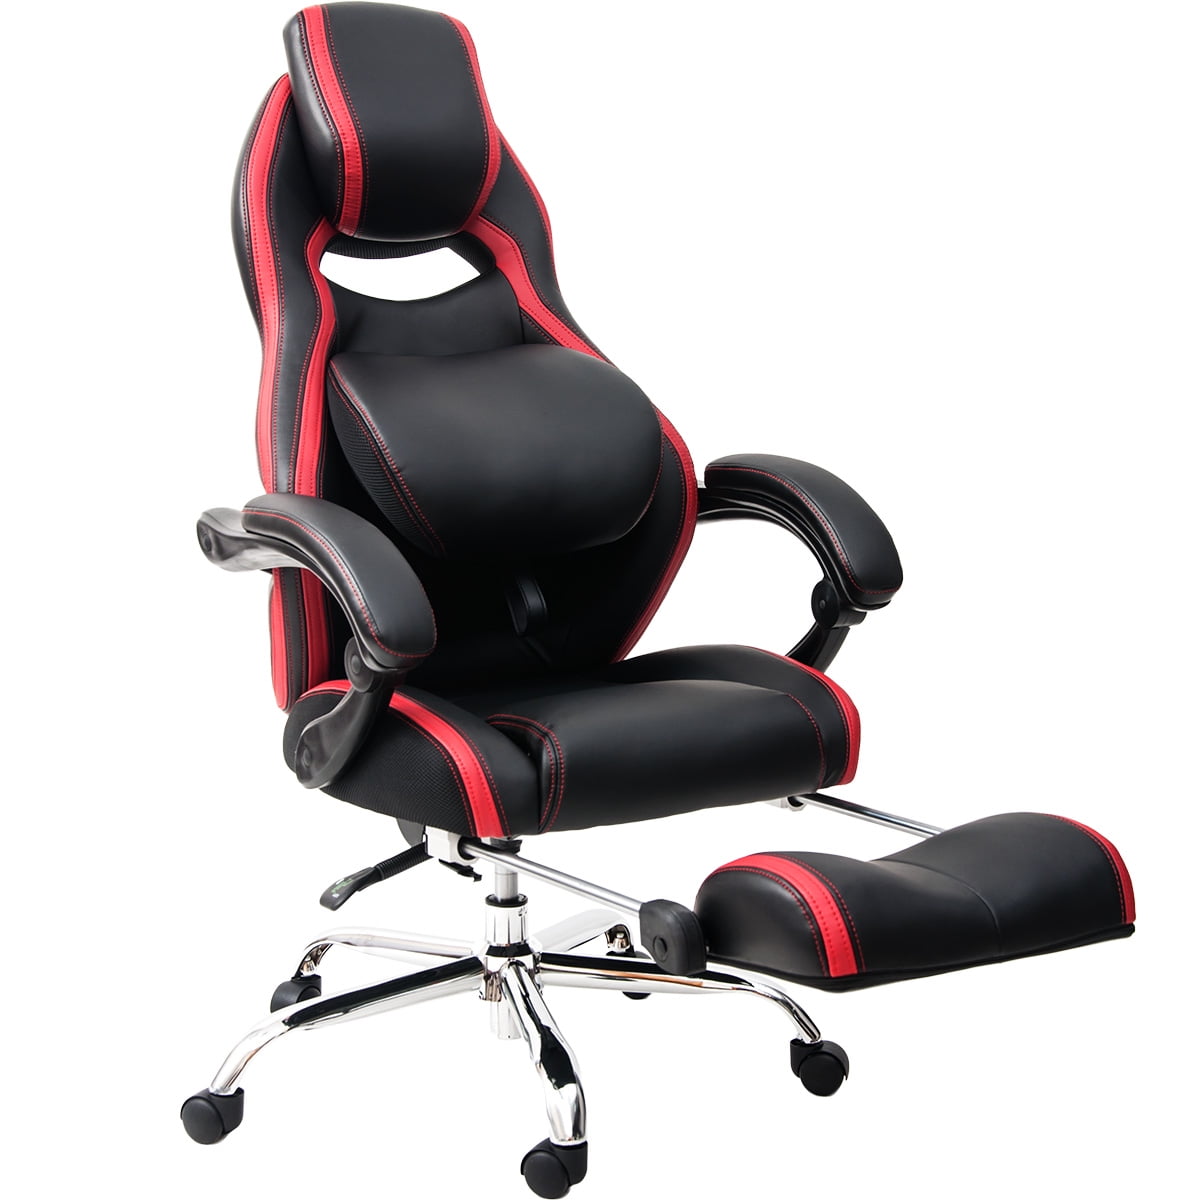 Red Sibosen Gaming Chair Office Chair Computer Chair High Back PU Leather Desk Chair Ergonomic Adjustable Reclining Swivel Game Chair with Footrest Lumbar Support Headrest Armrest 